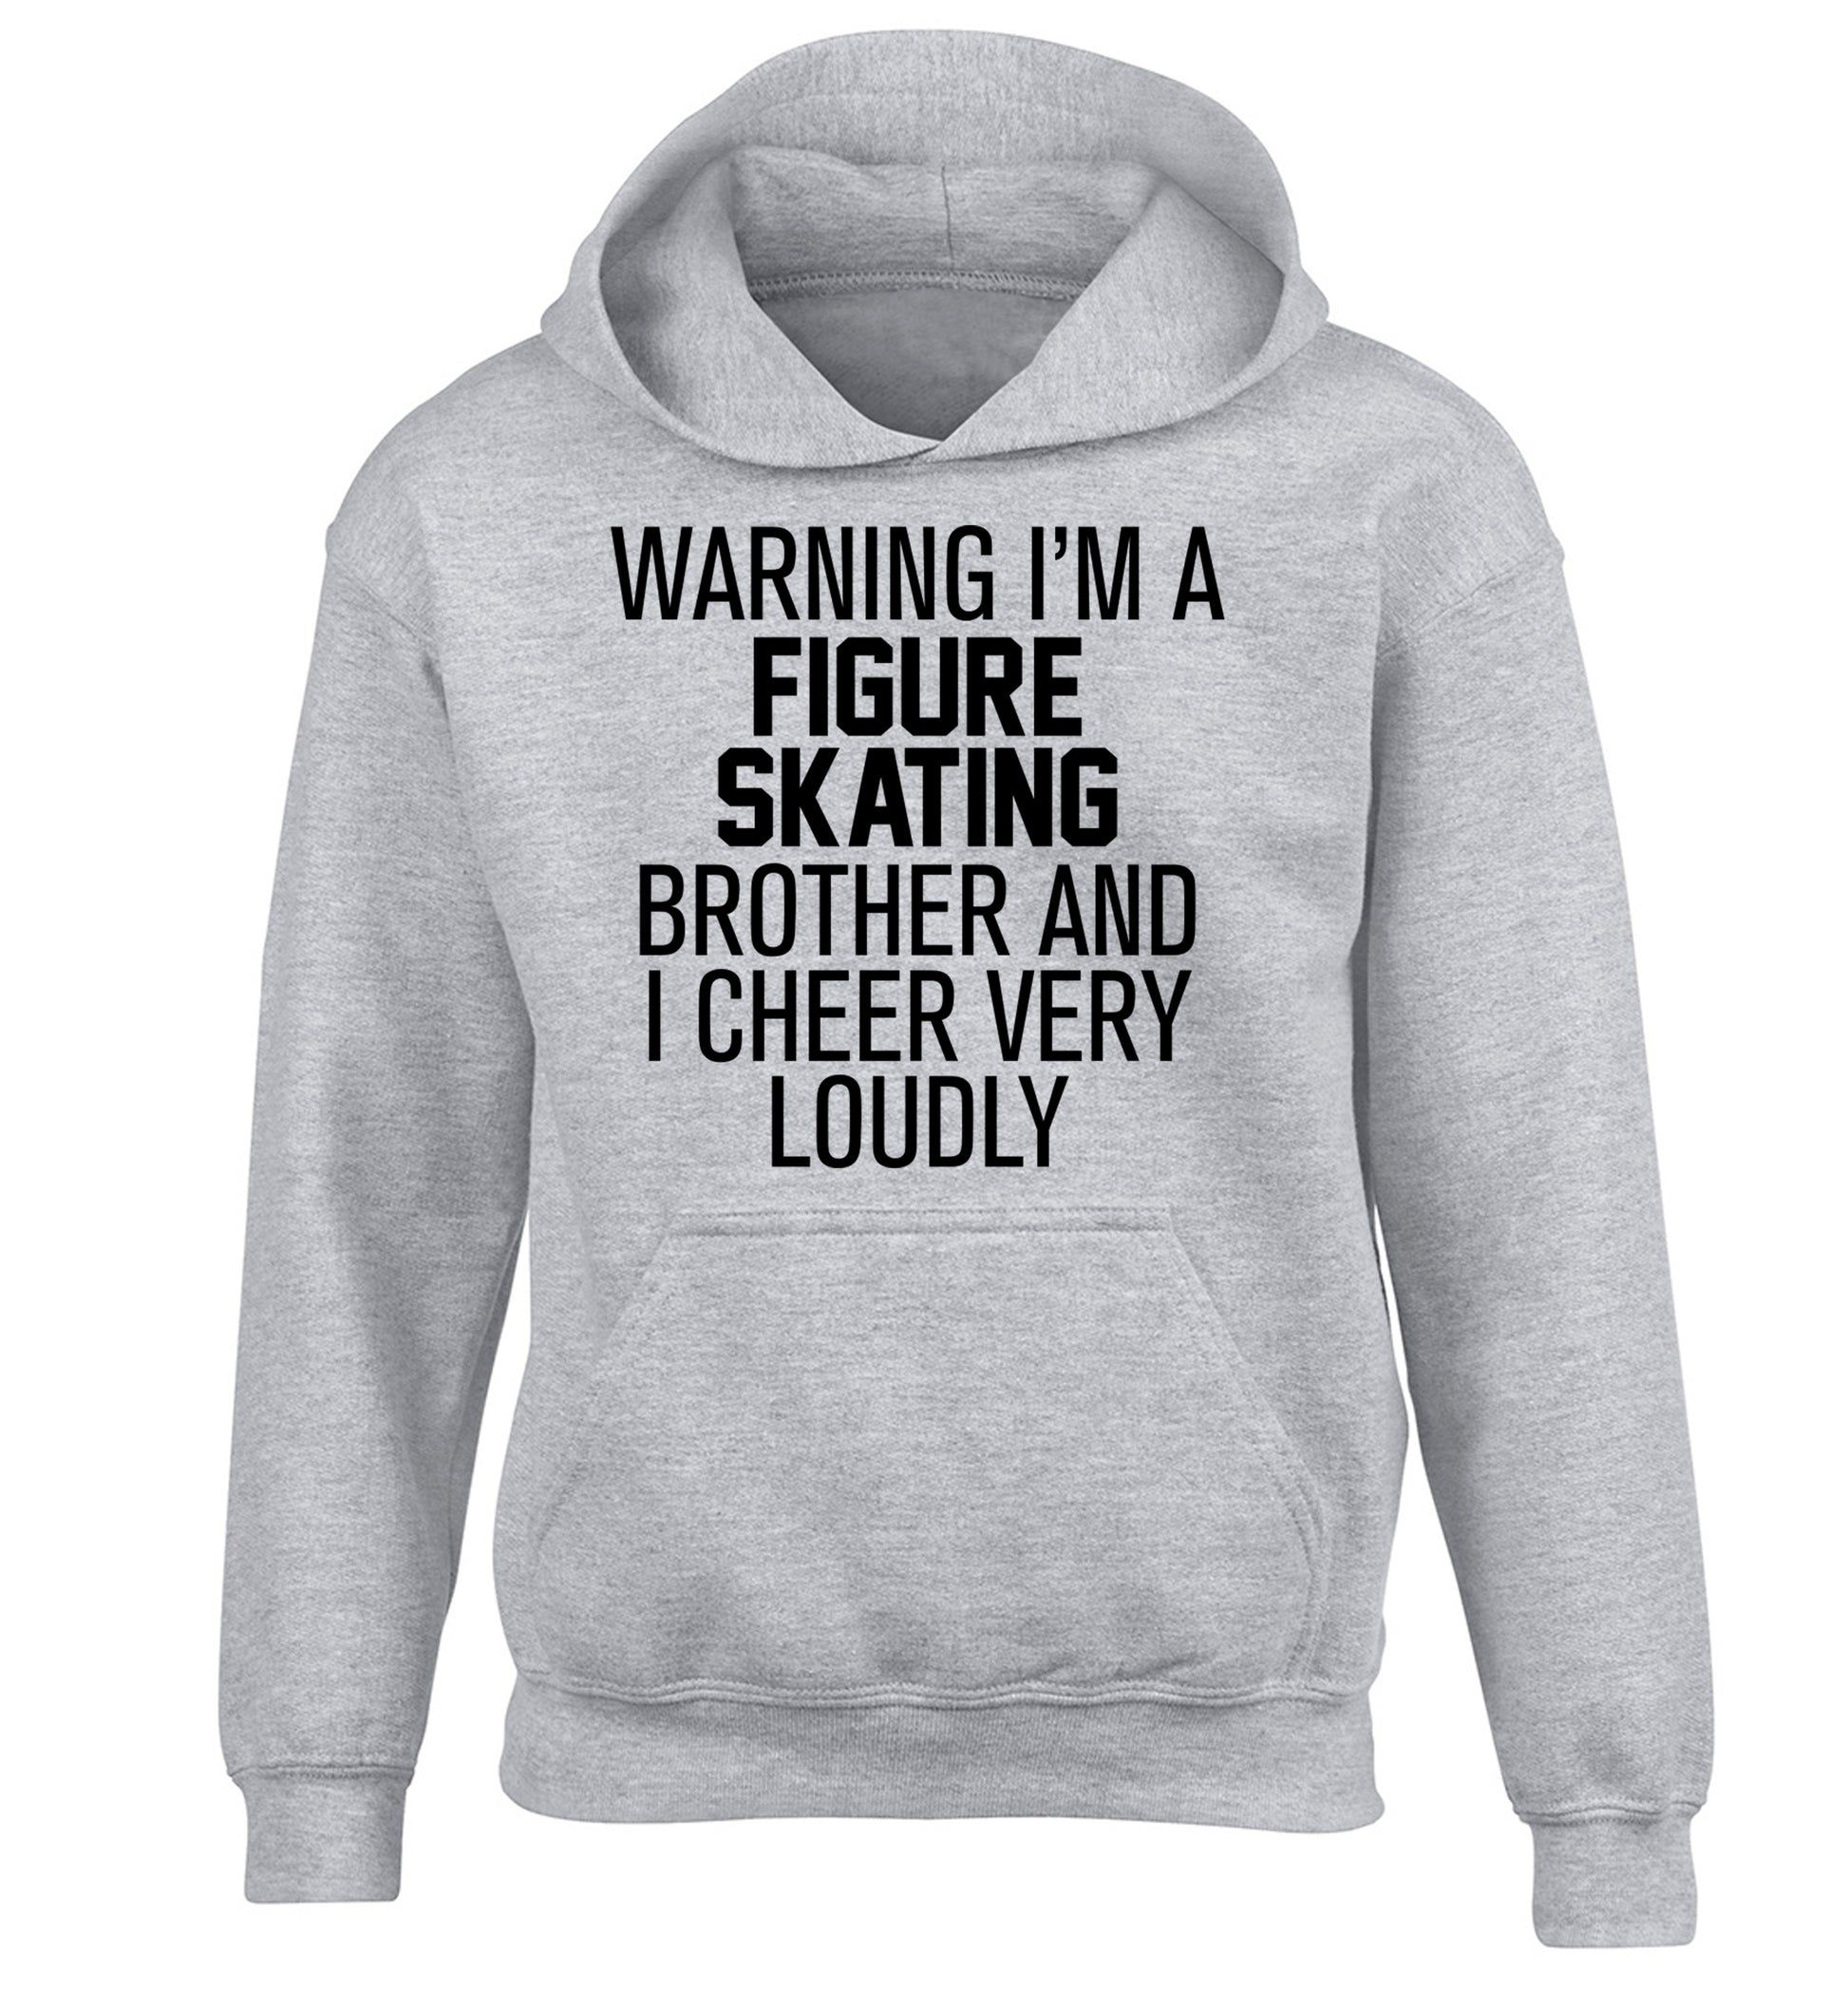 Warning I'm a figure skating brother and I cheer very loudly children's grey hoodie 12-14 Years